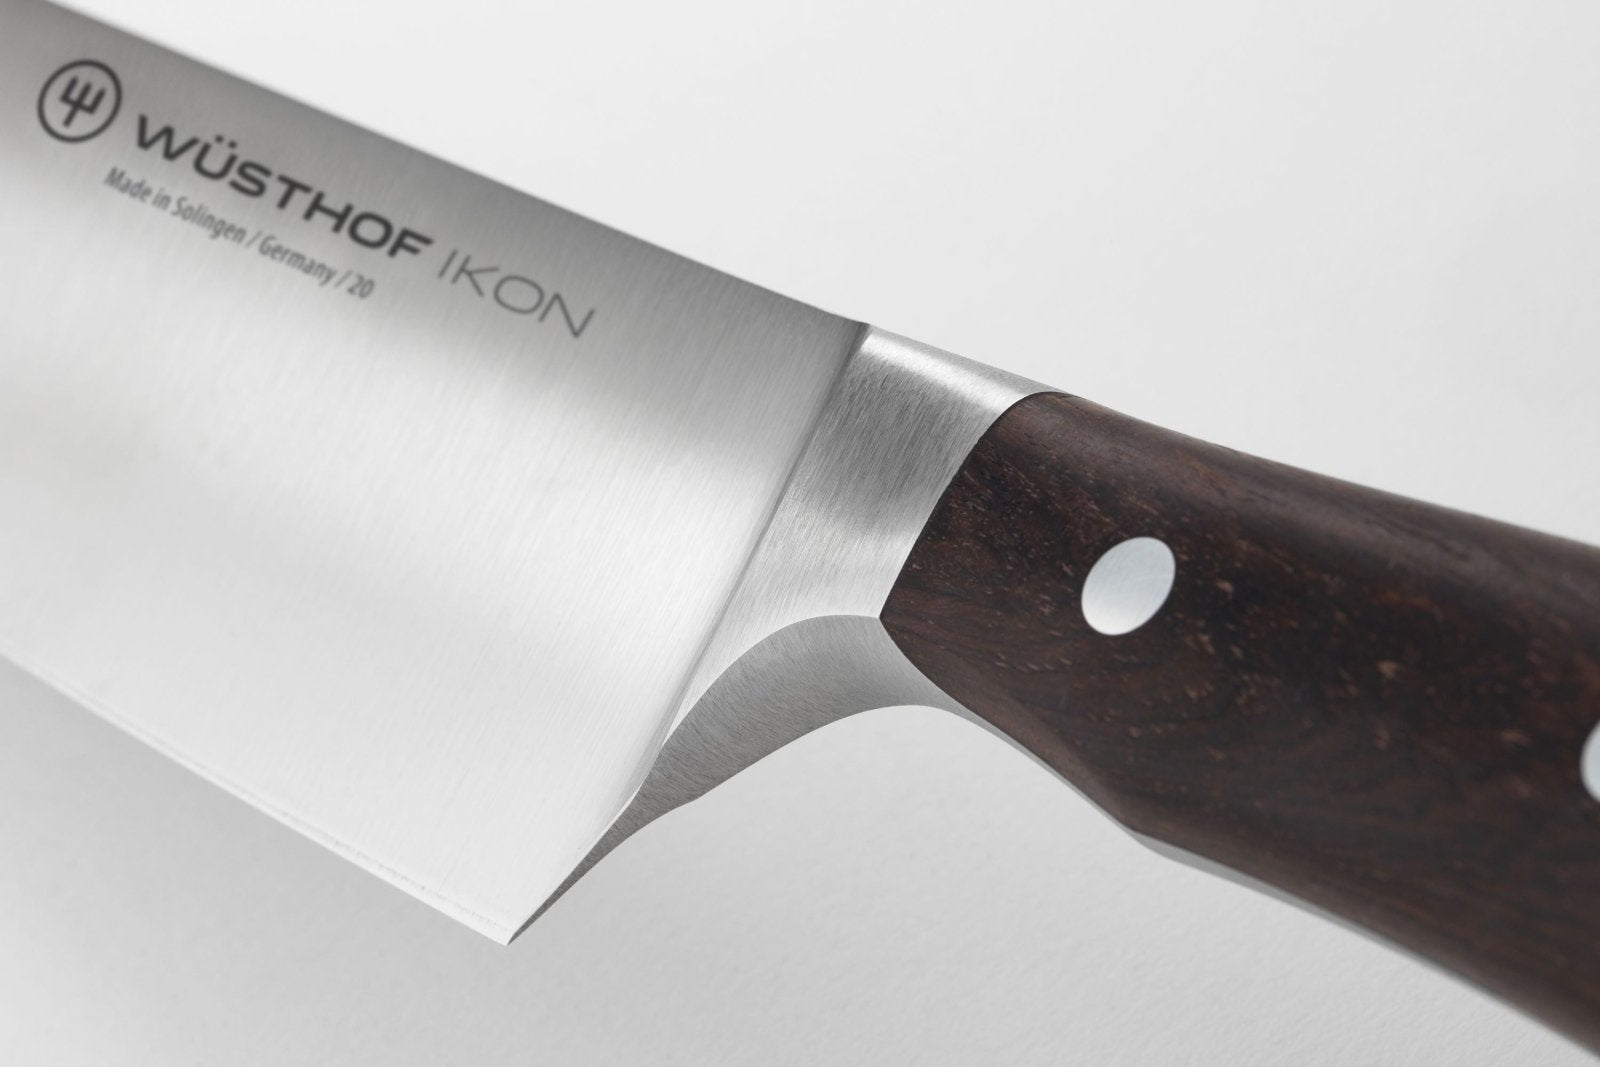 Wusthof IKON 20cm Carving Knife - WT1010530720 - The Cotswold Knife Company